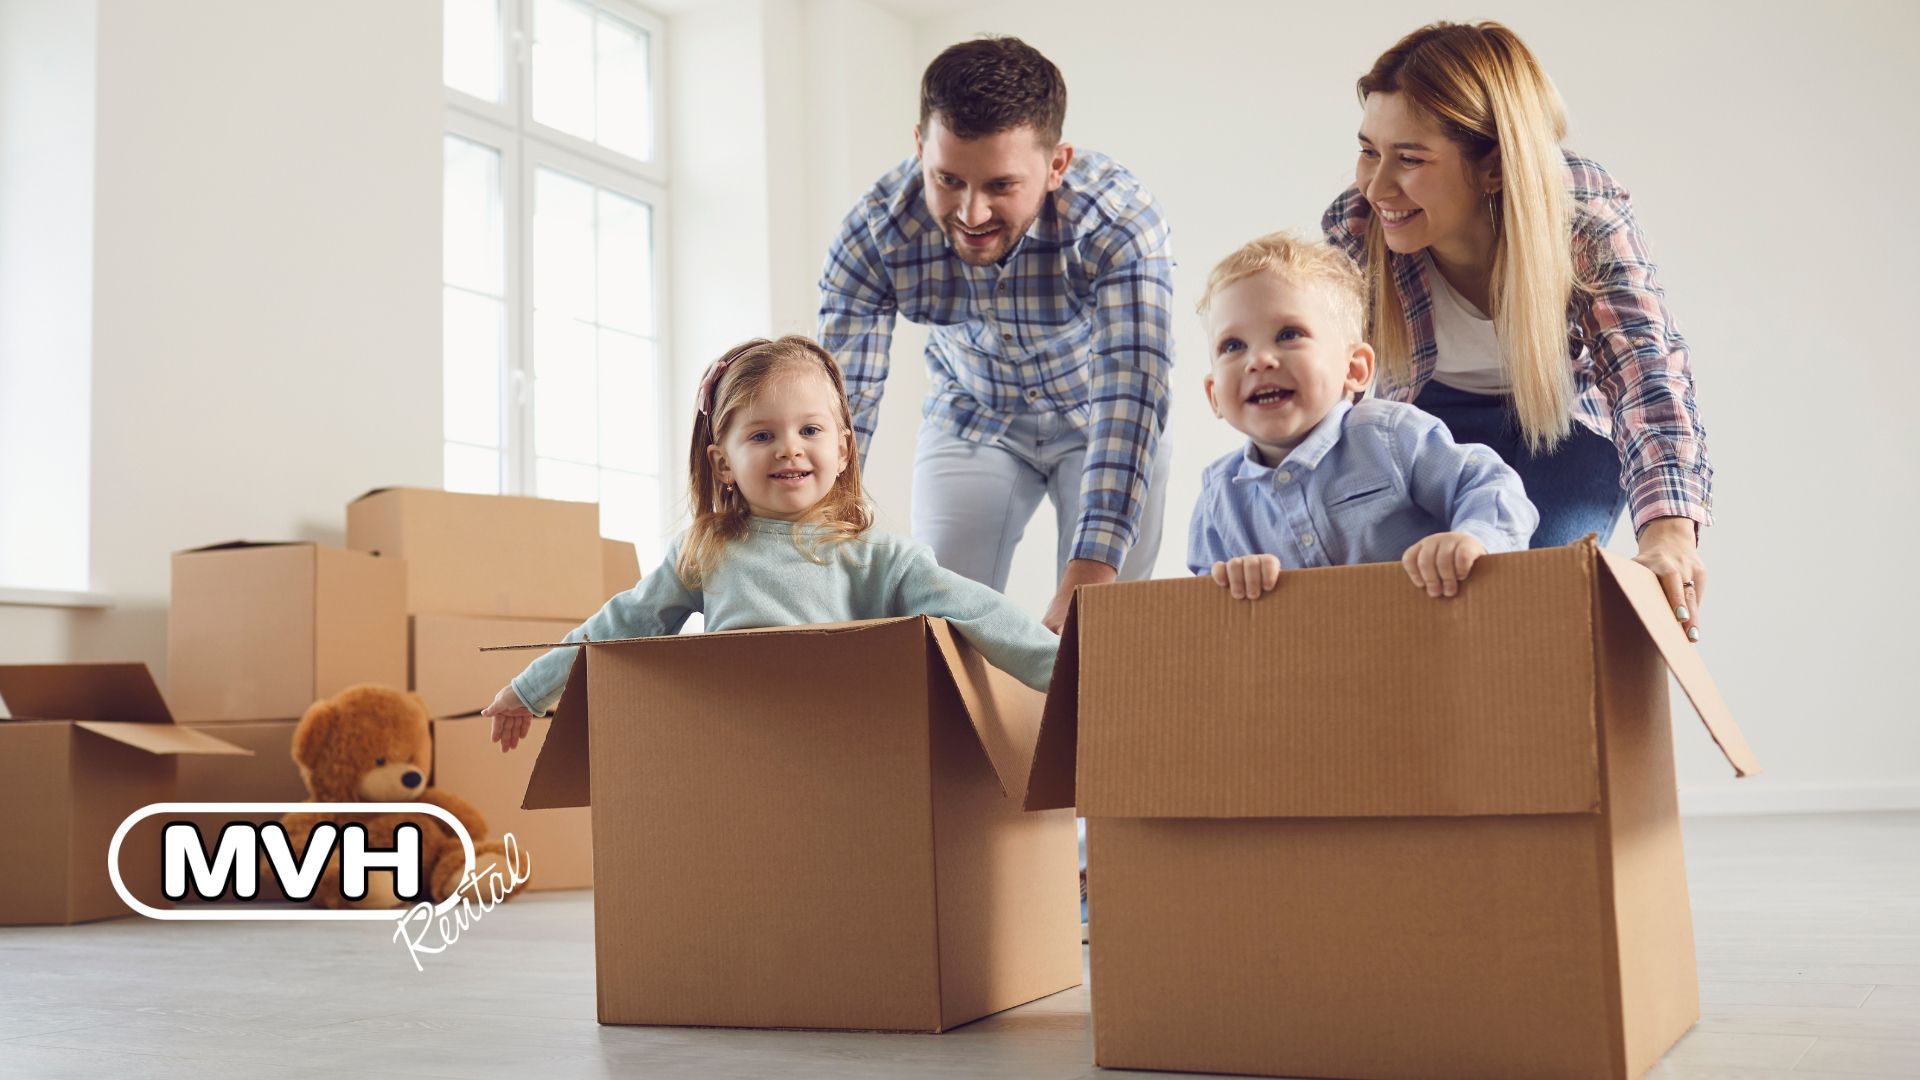 Moving house can be stressful at the best of times. Check out our easy ABC guide for tips on mastering that move and hiring the right van to help.